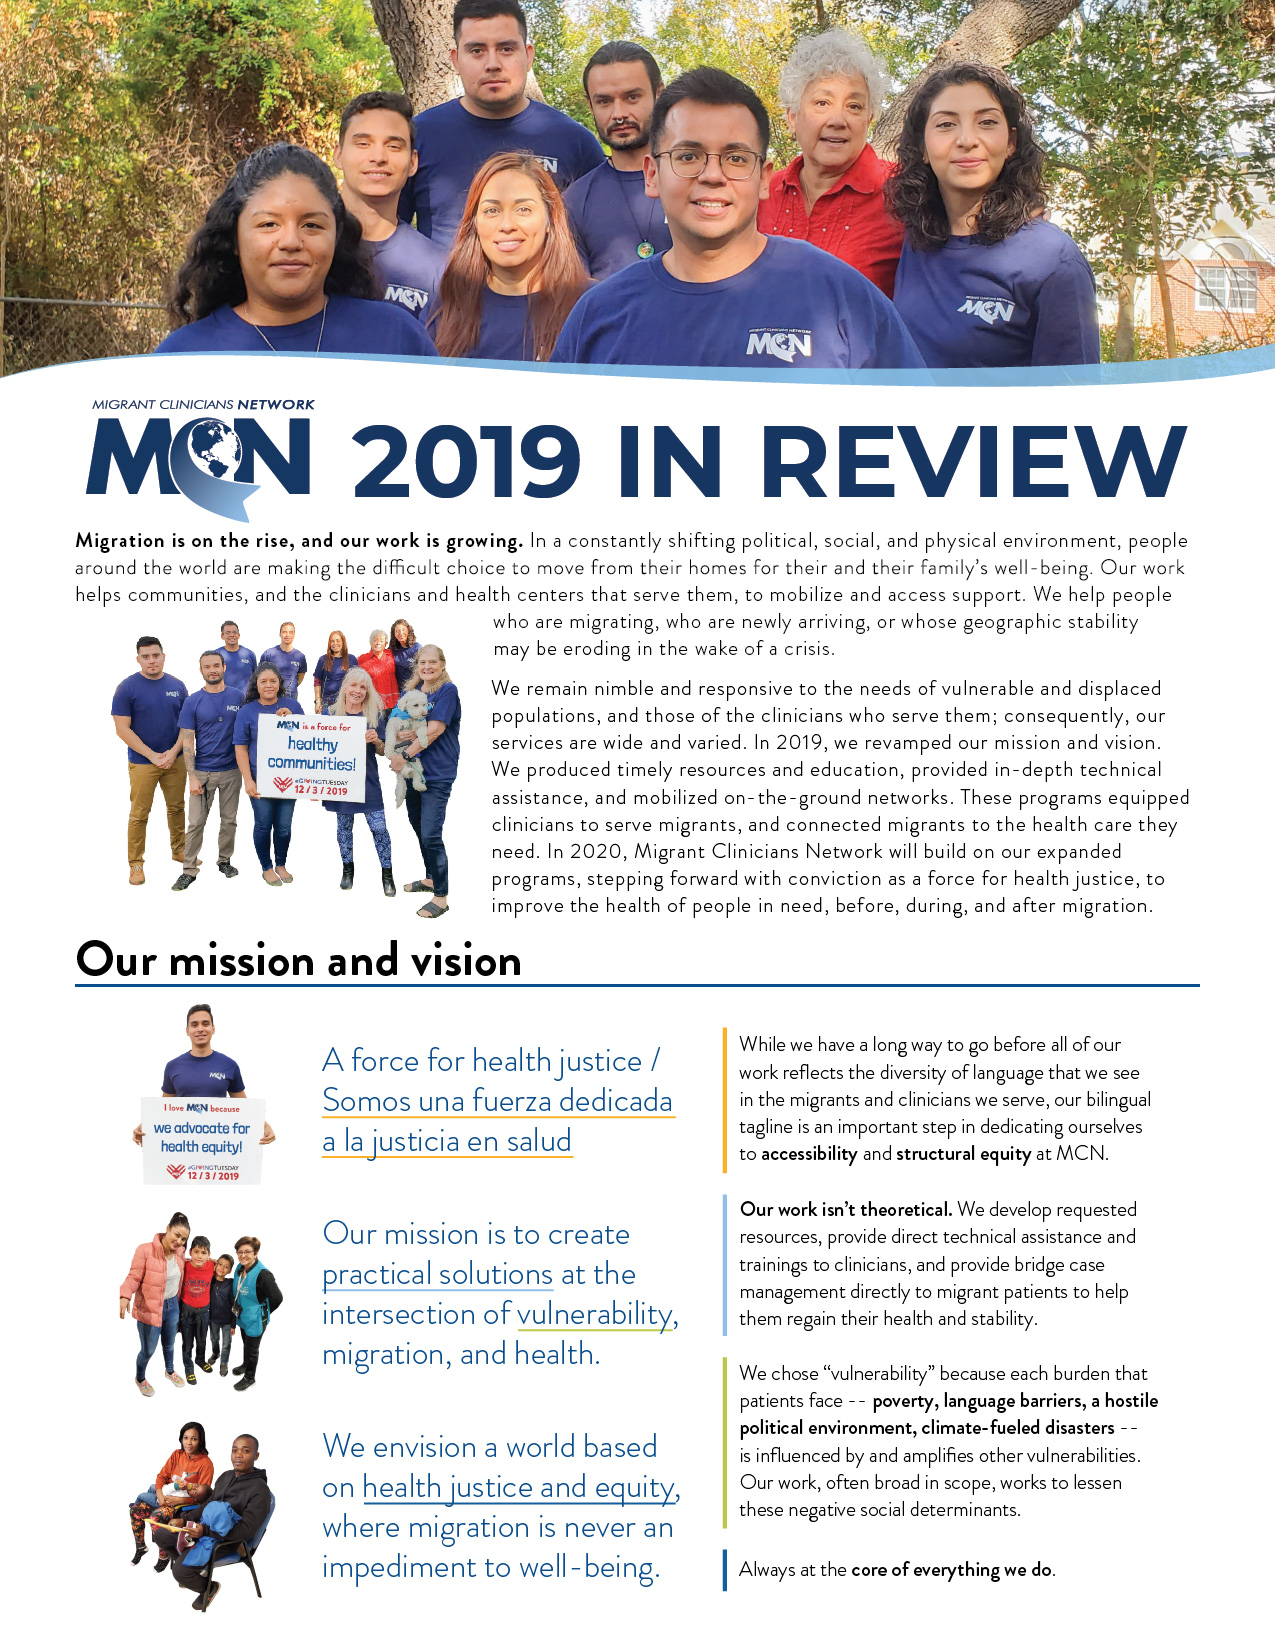 Our Mission and Vision page of the Year in Review